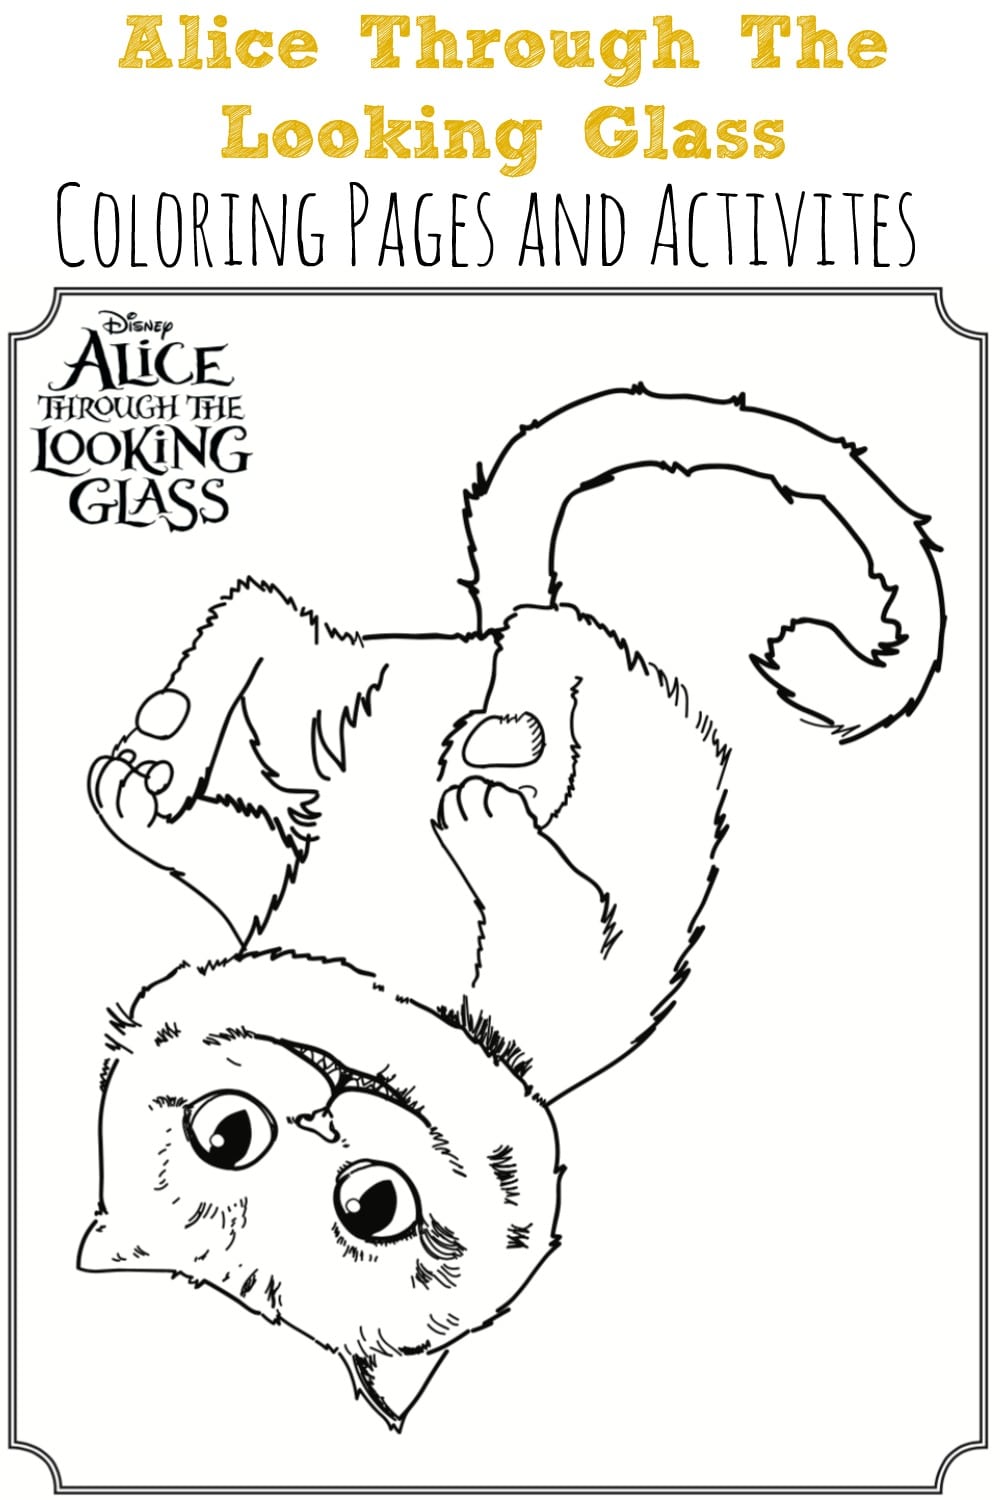 Alice Through The Looking Glass Coloring Sheets